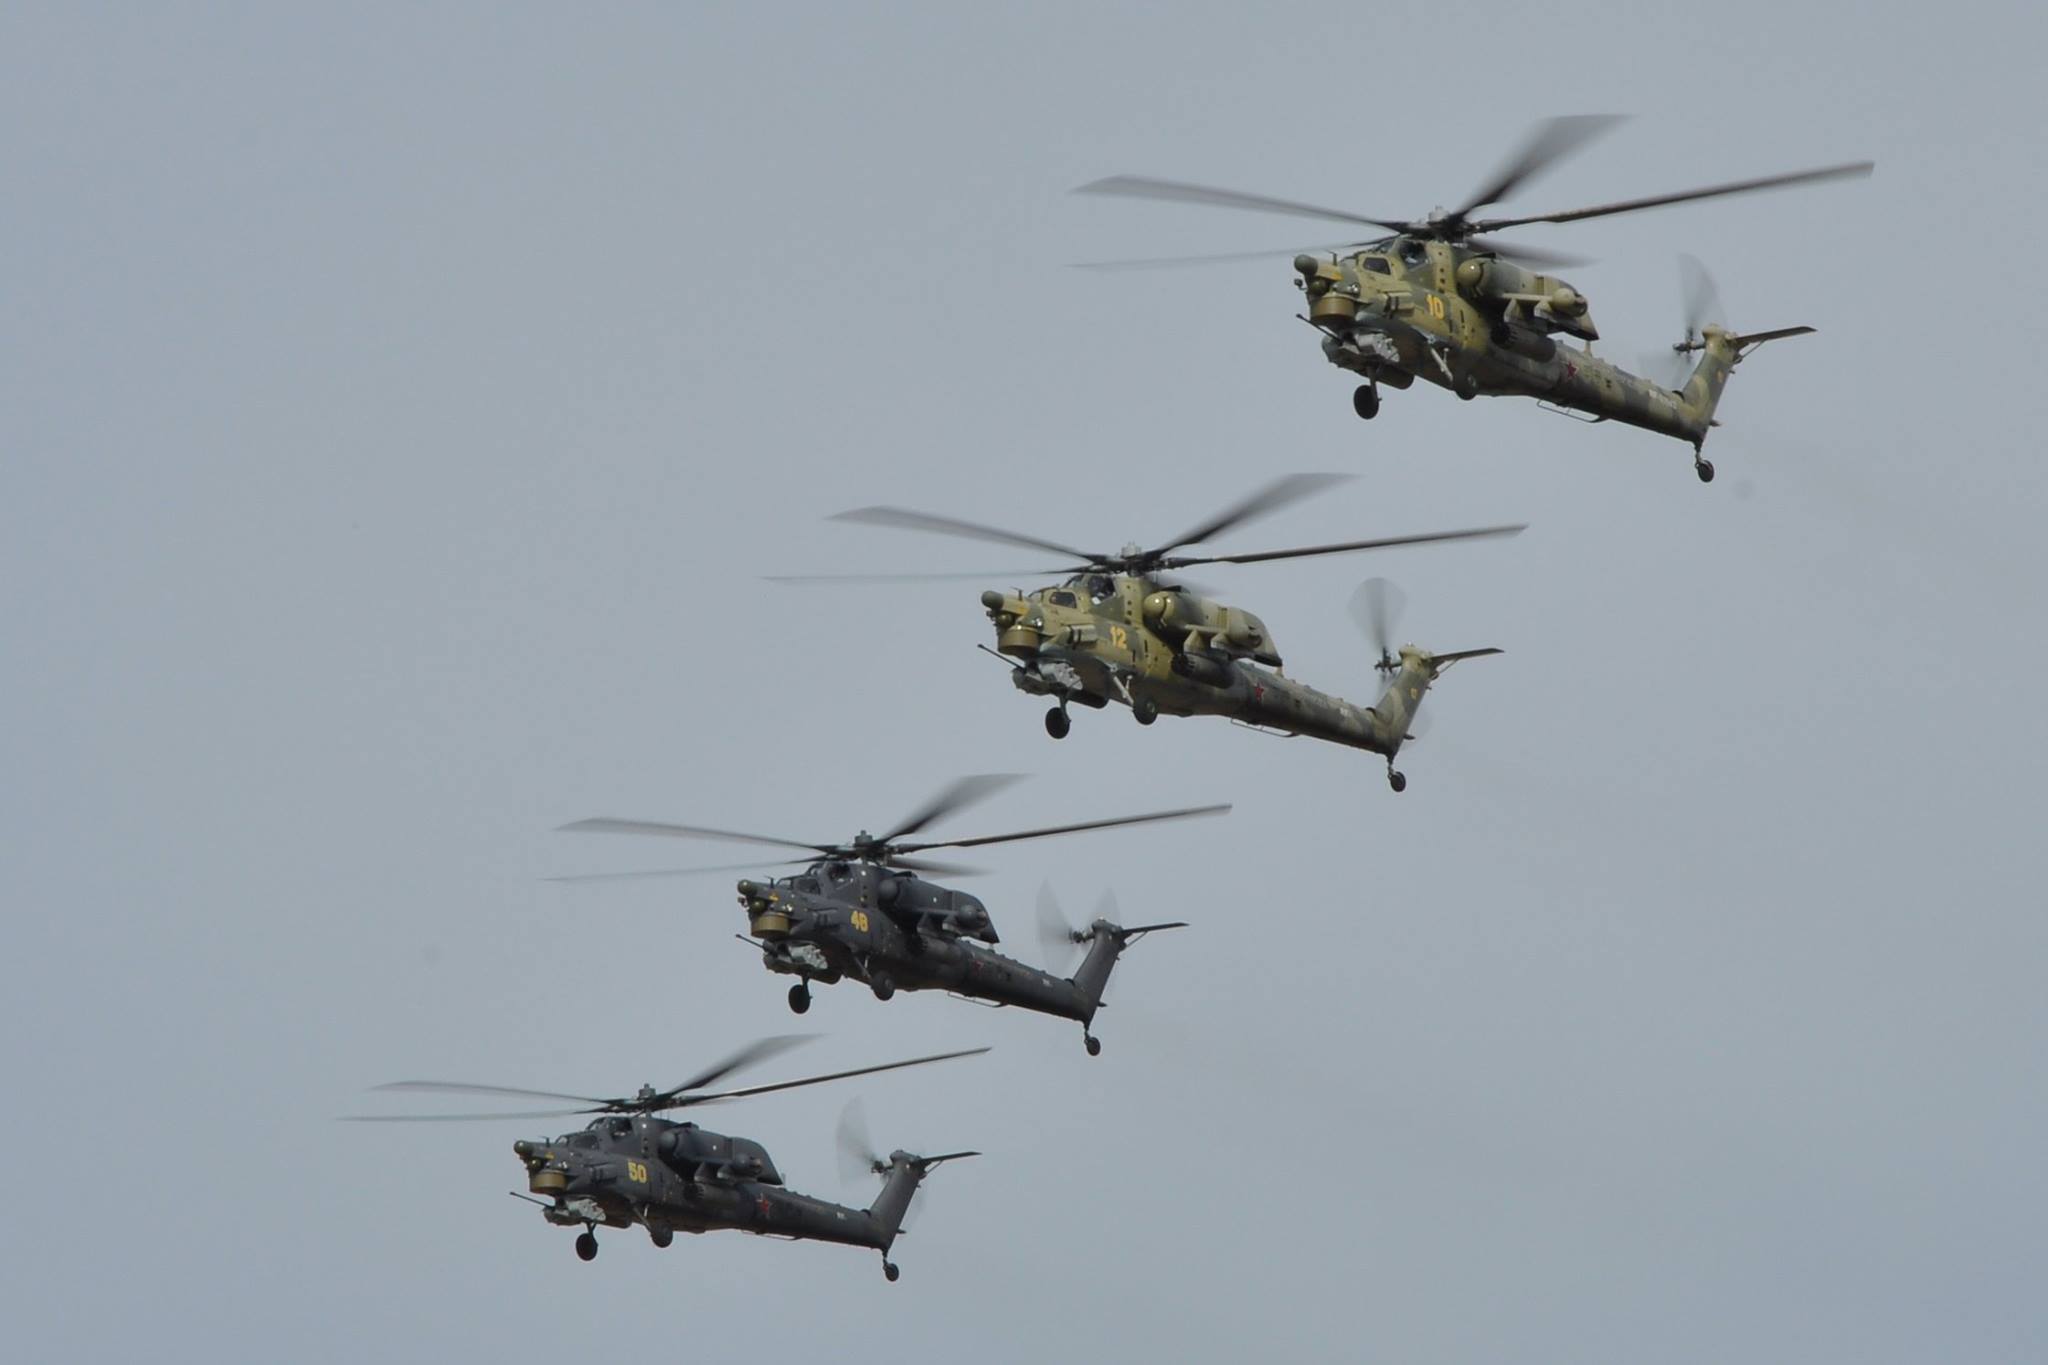 The Mi-28NE Night Hunter is a modern attack helicopter designed to carry out search and destroy operations against tanks, armoured and un-armoured vehicles, and enemy personnel in combat, as well as low-speed airborne targets. It can operate night and day, and in adverse weather conditions.